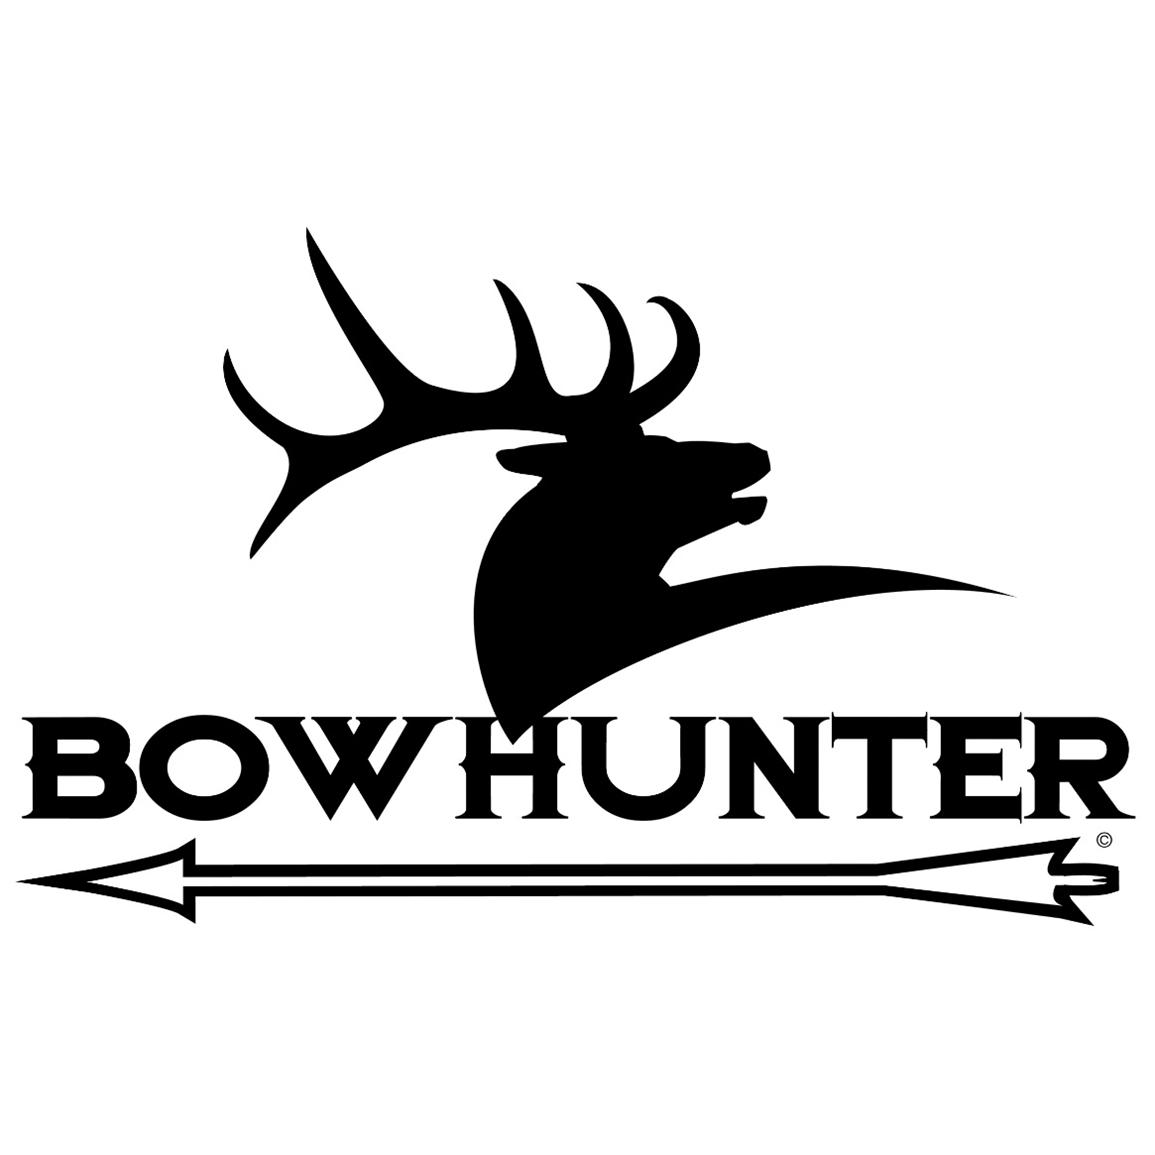 Bow hunting clipart 